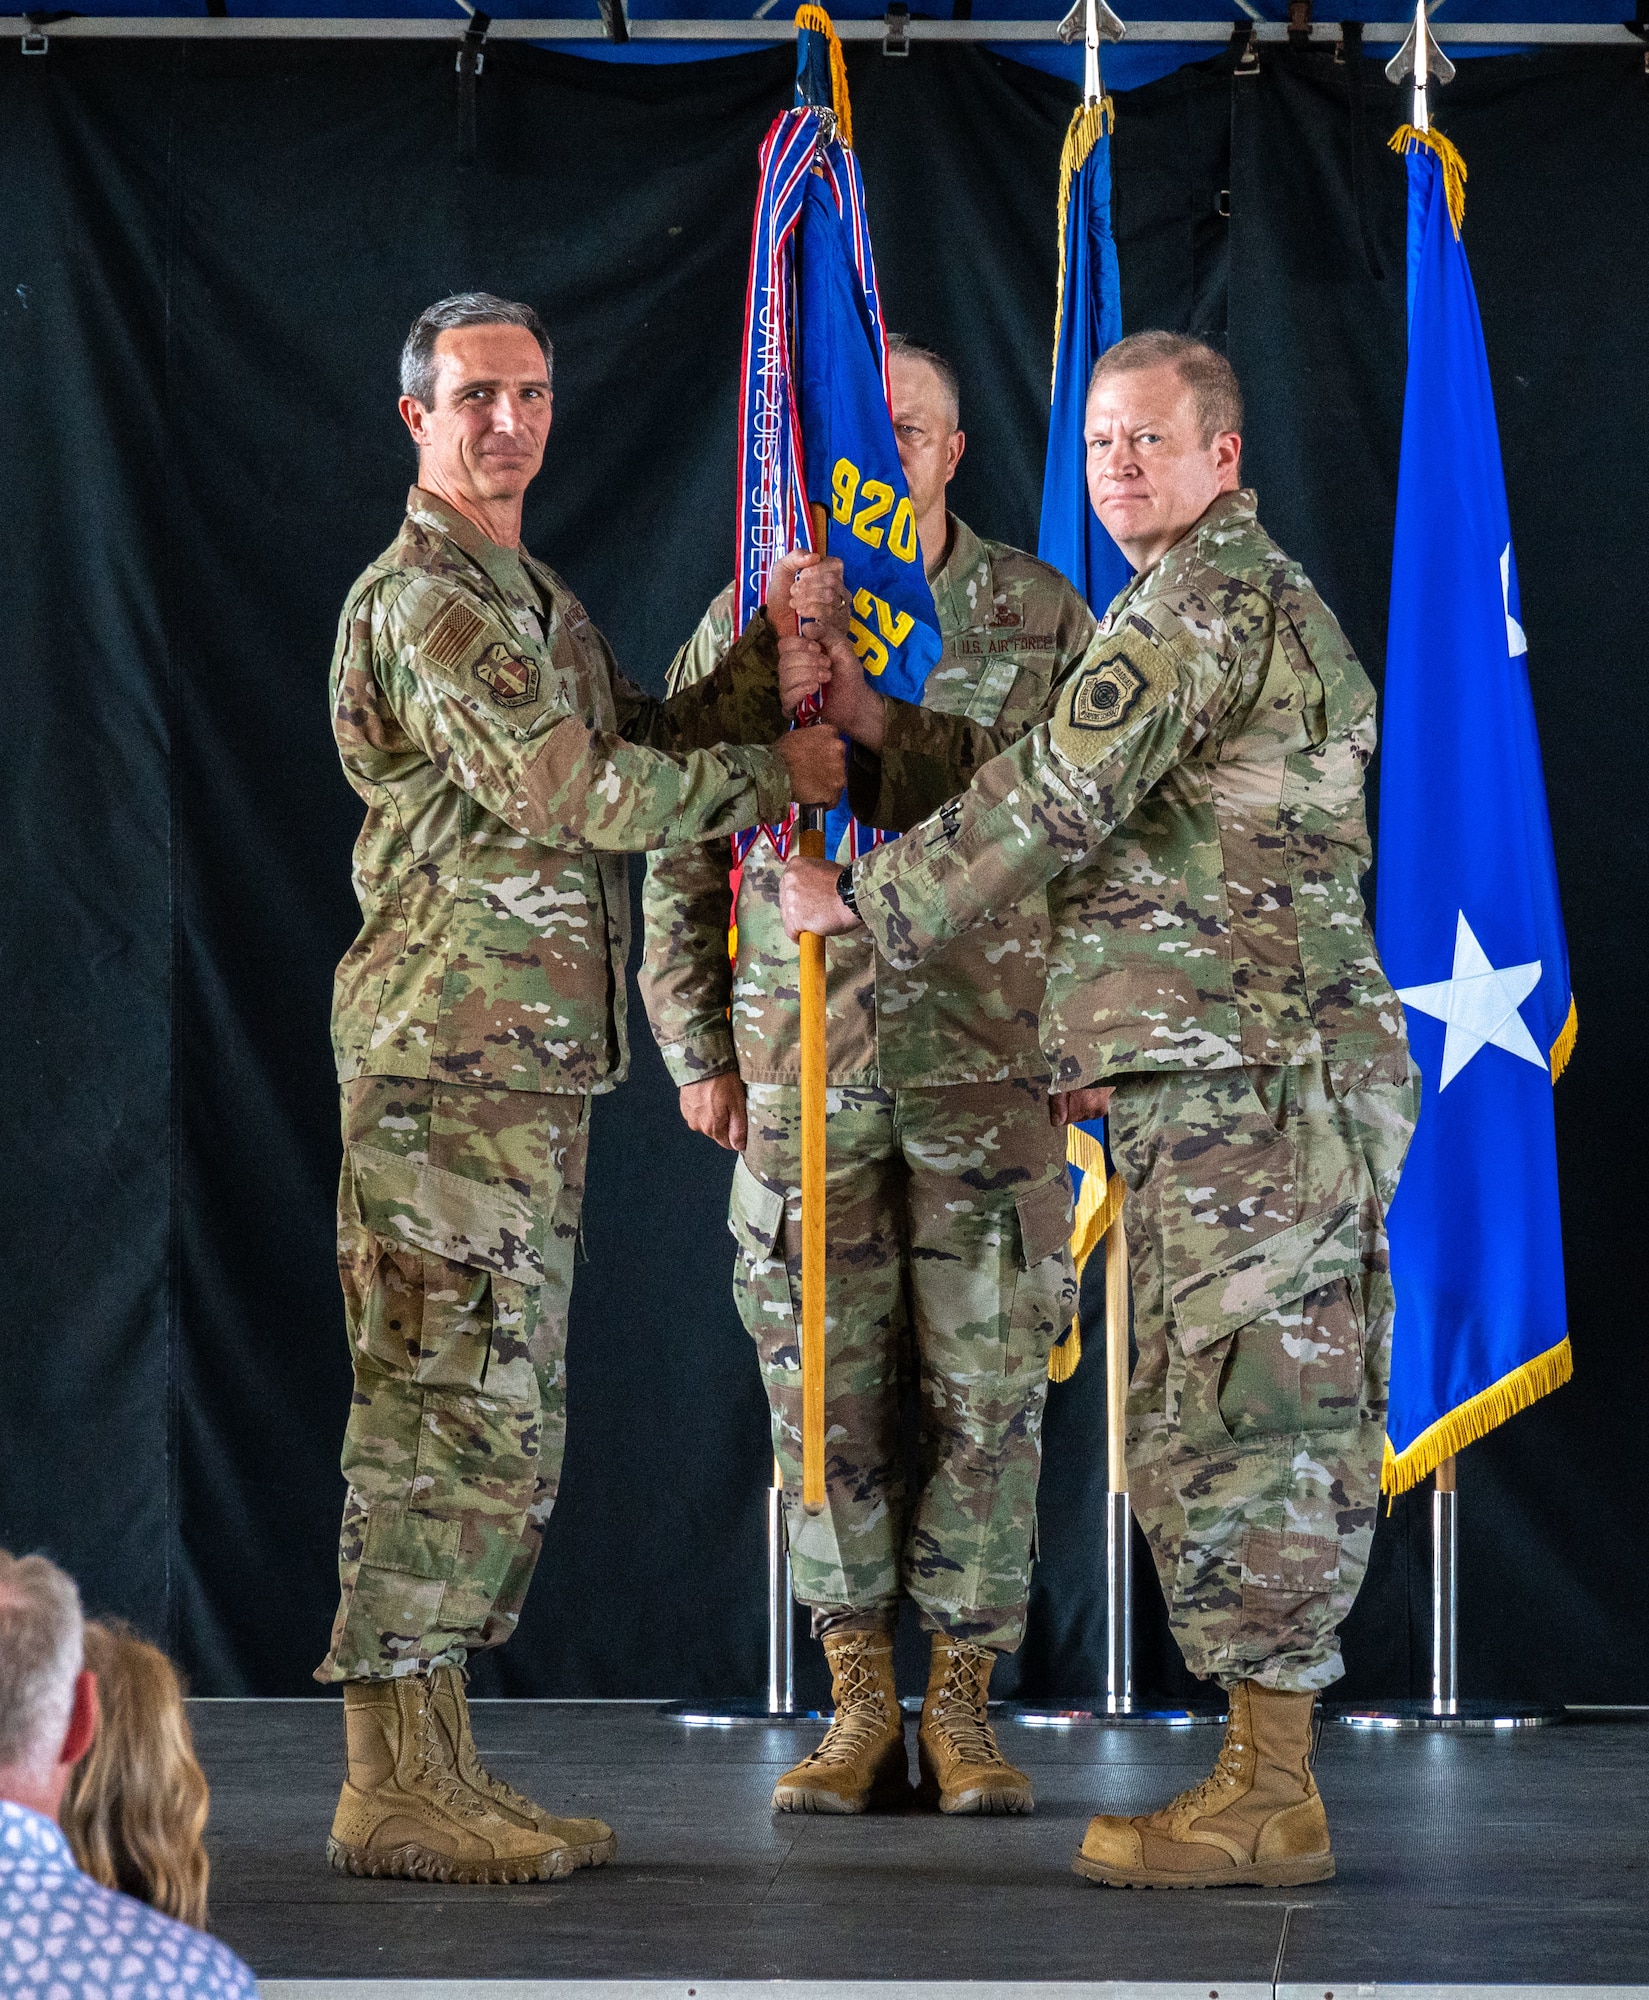 Lt. Gen. Bryan Radliff, 10th Air Force commander, presents the wing guidon to Col. Jesse Hamilton, incoming 920th Rescue Wing commander, during a change of command ceremony, Sept. 11, 2022, at Patrick Space Force Base, Florida. The change of command is a military tradition that formally signifies the transfer of responsibility and authority from one commanding officer to another; symbolized through the passing of a guidon. (U.S. Air Force photo by Master Sgt. Kelly Goonan)